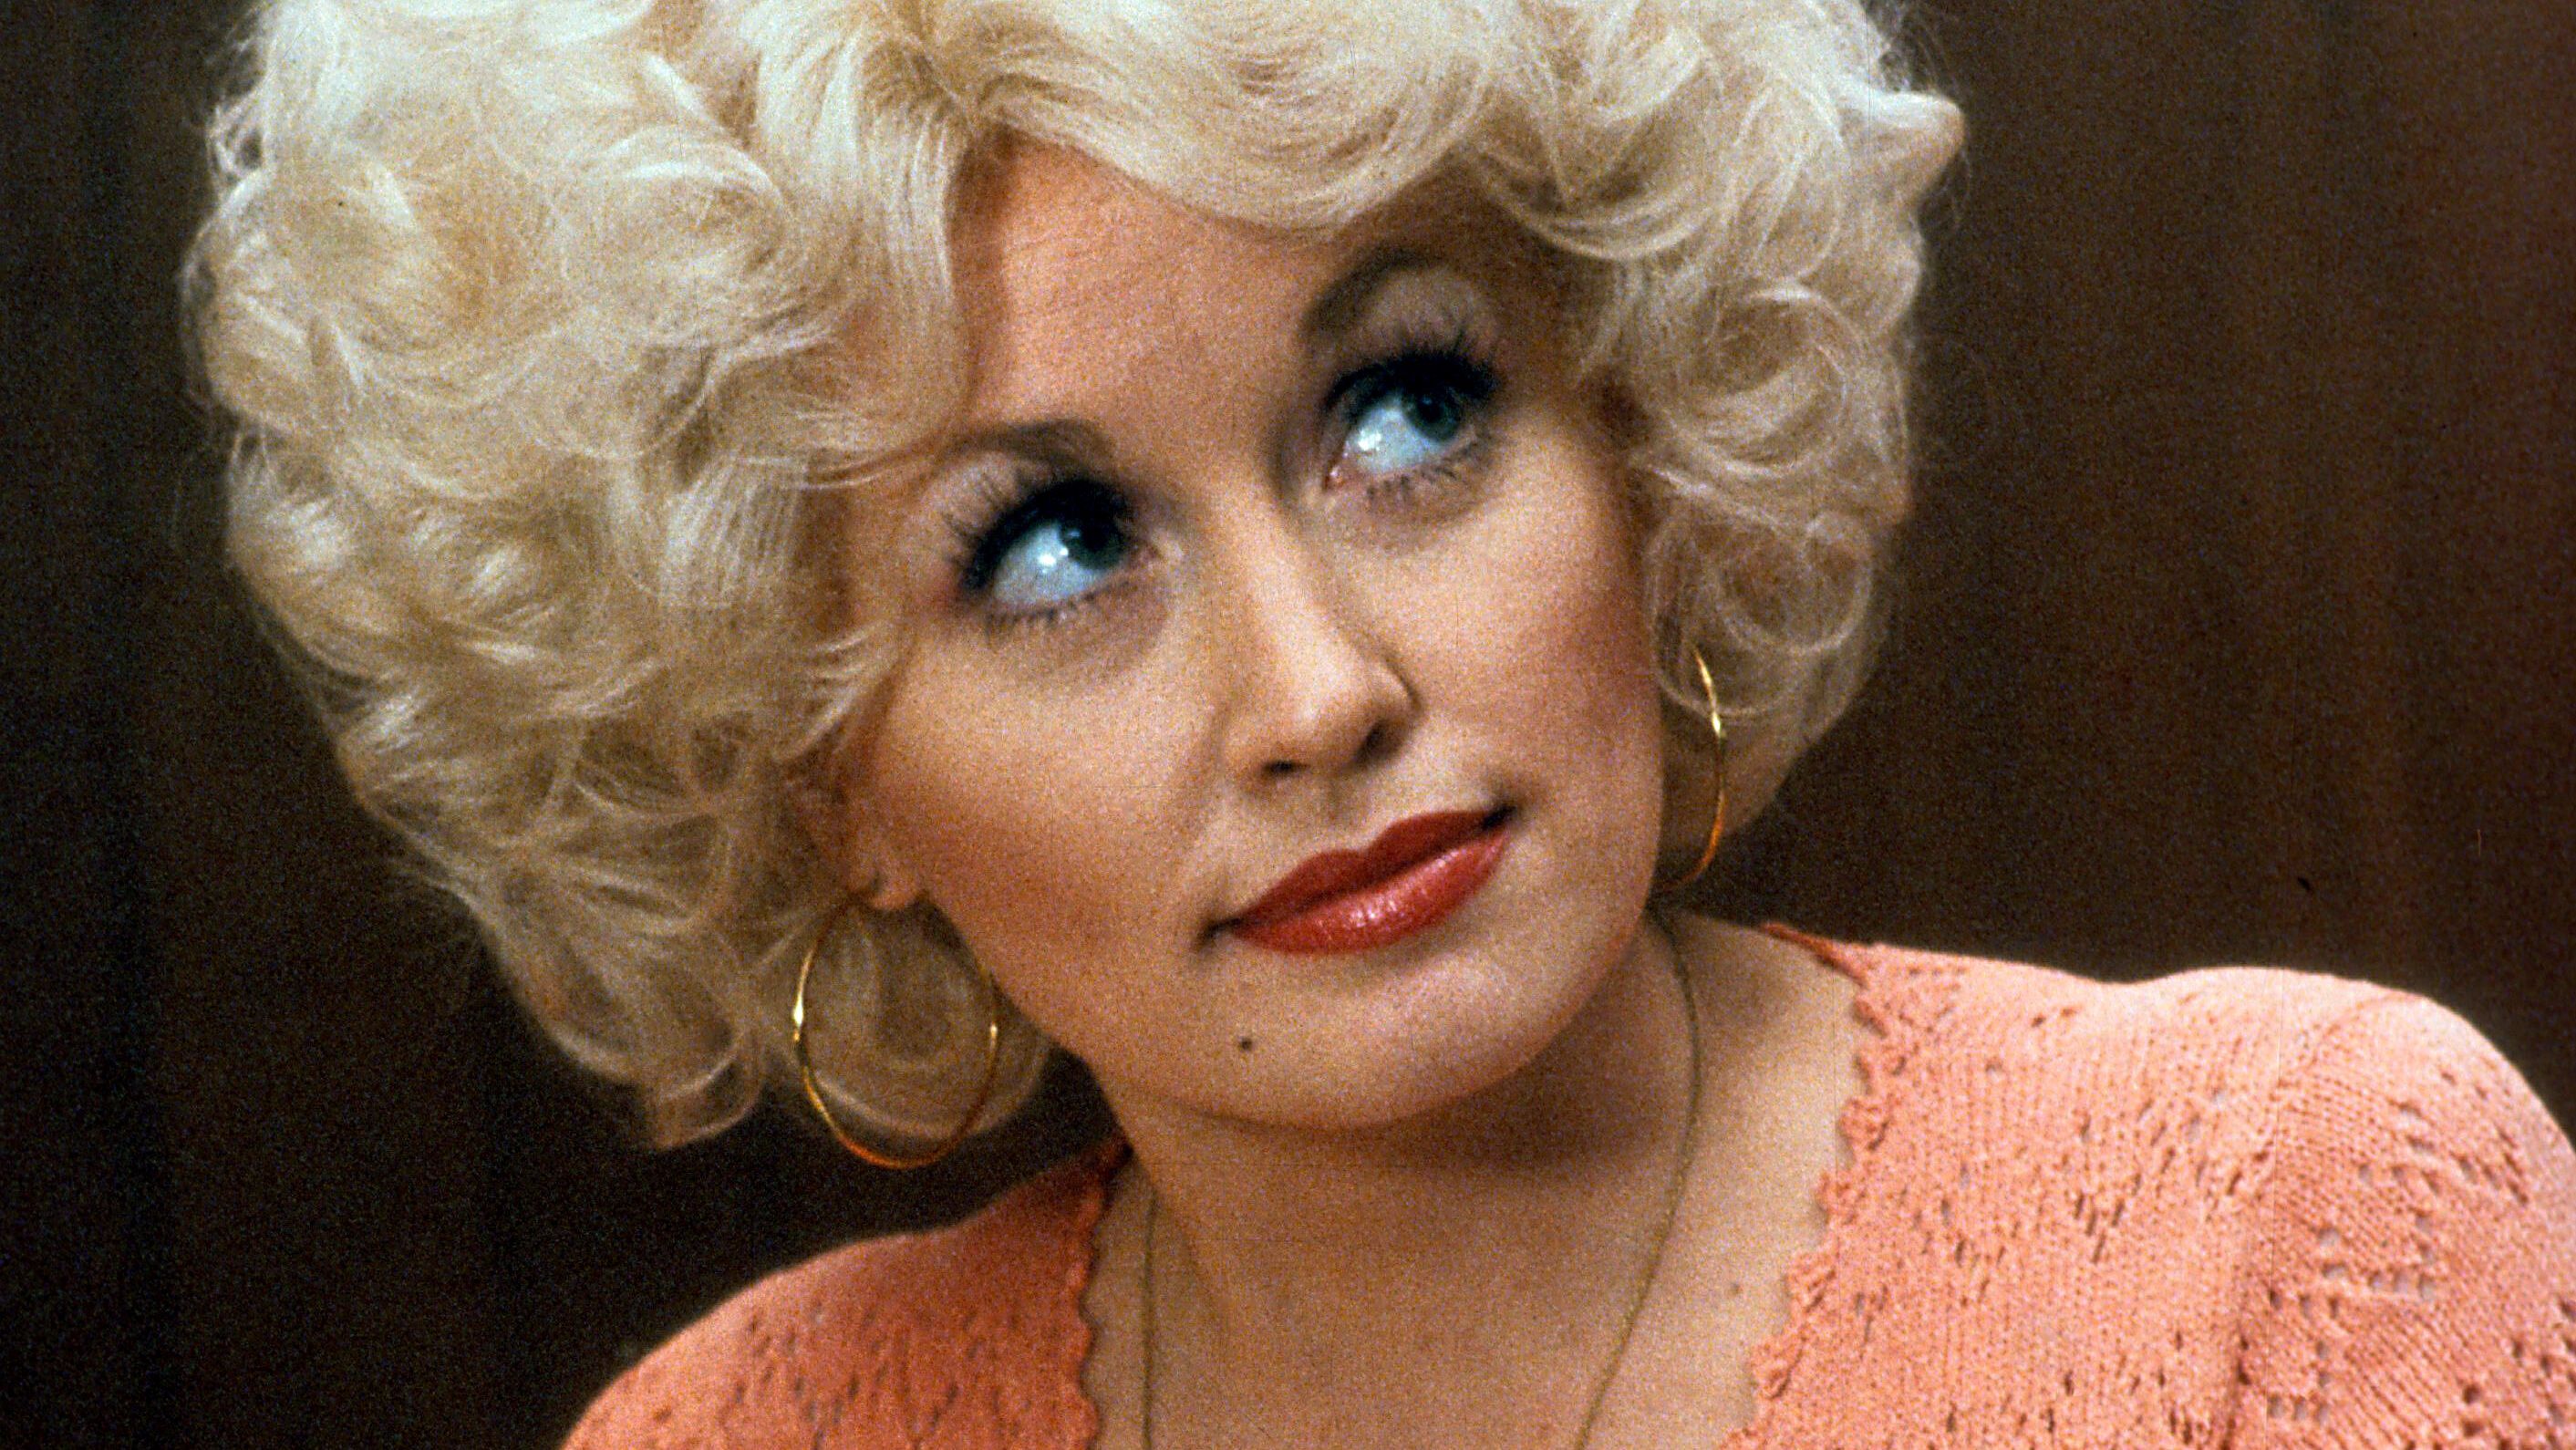 Dolly Parton in 9 to 5